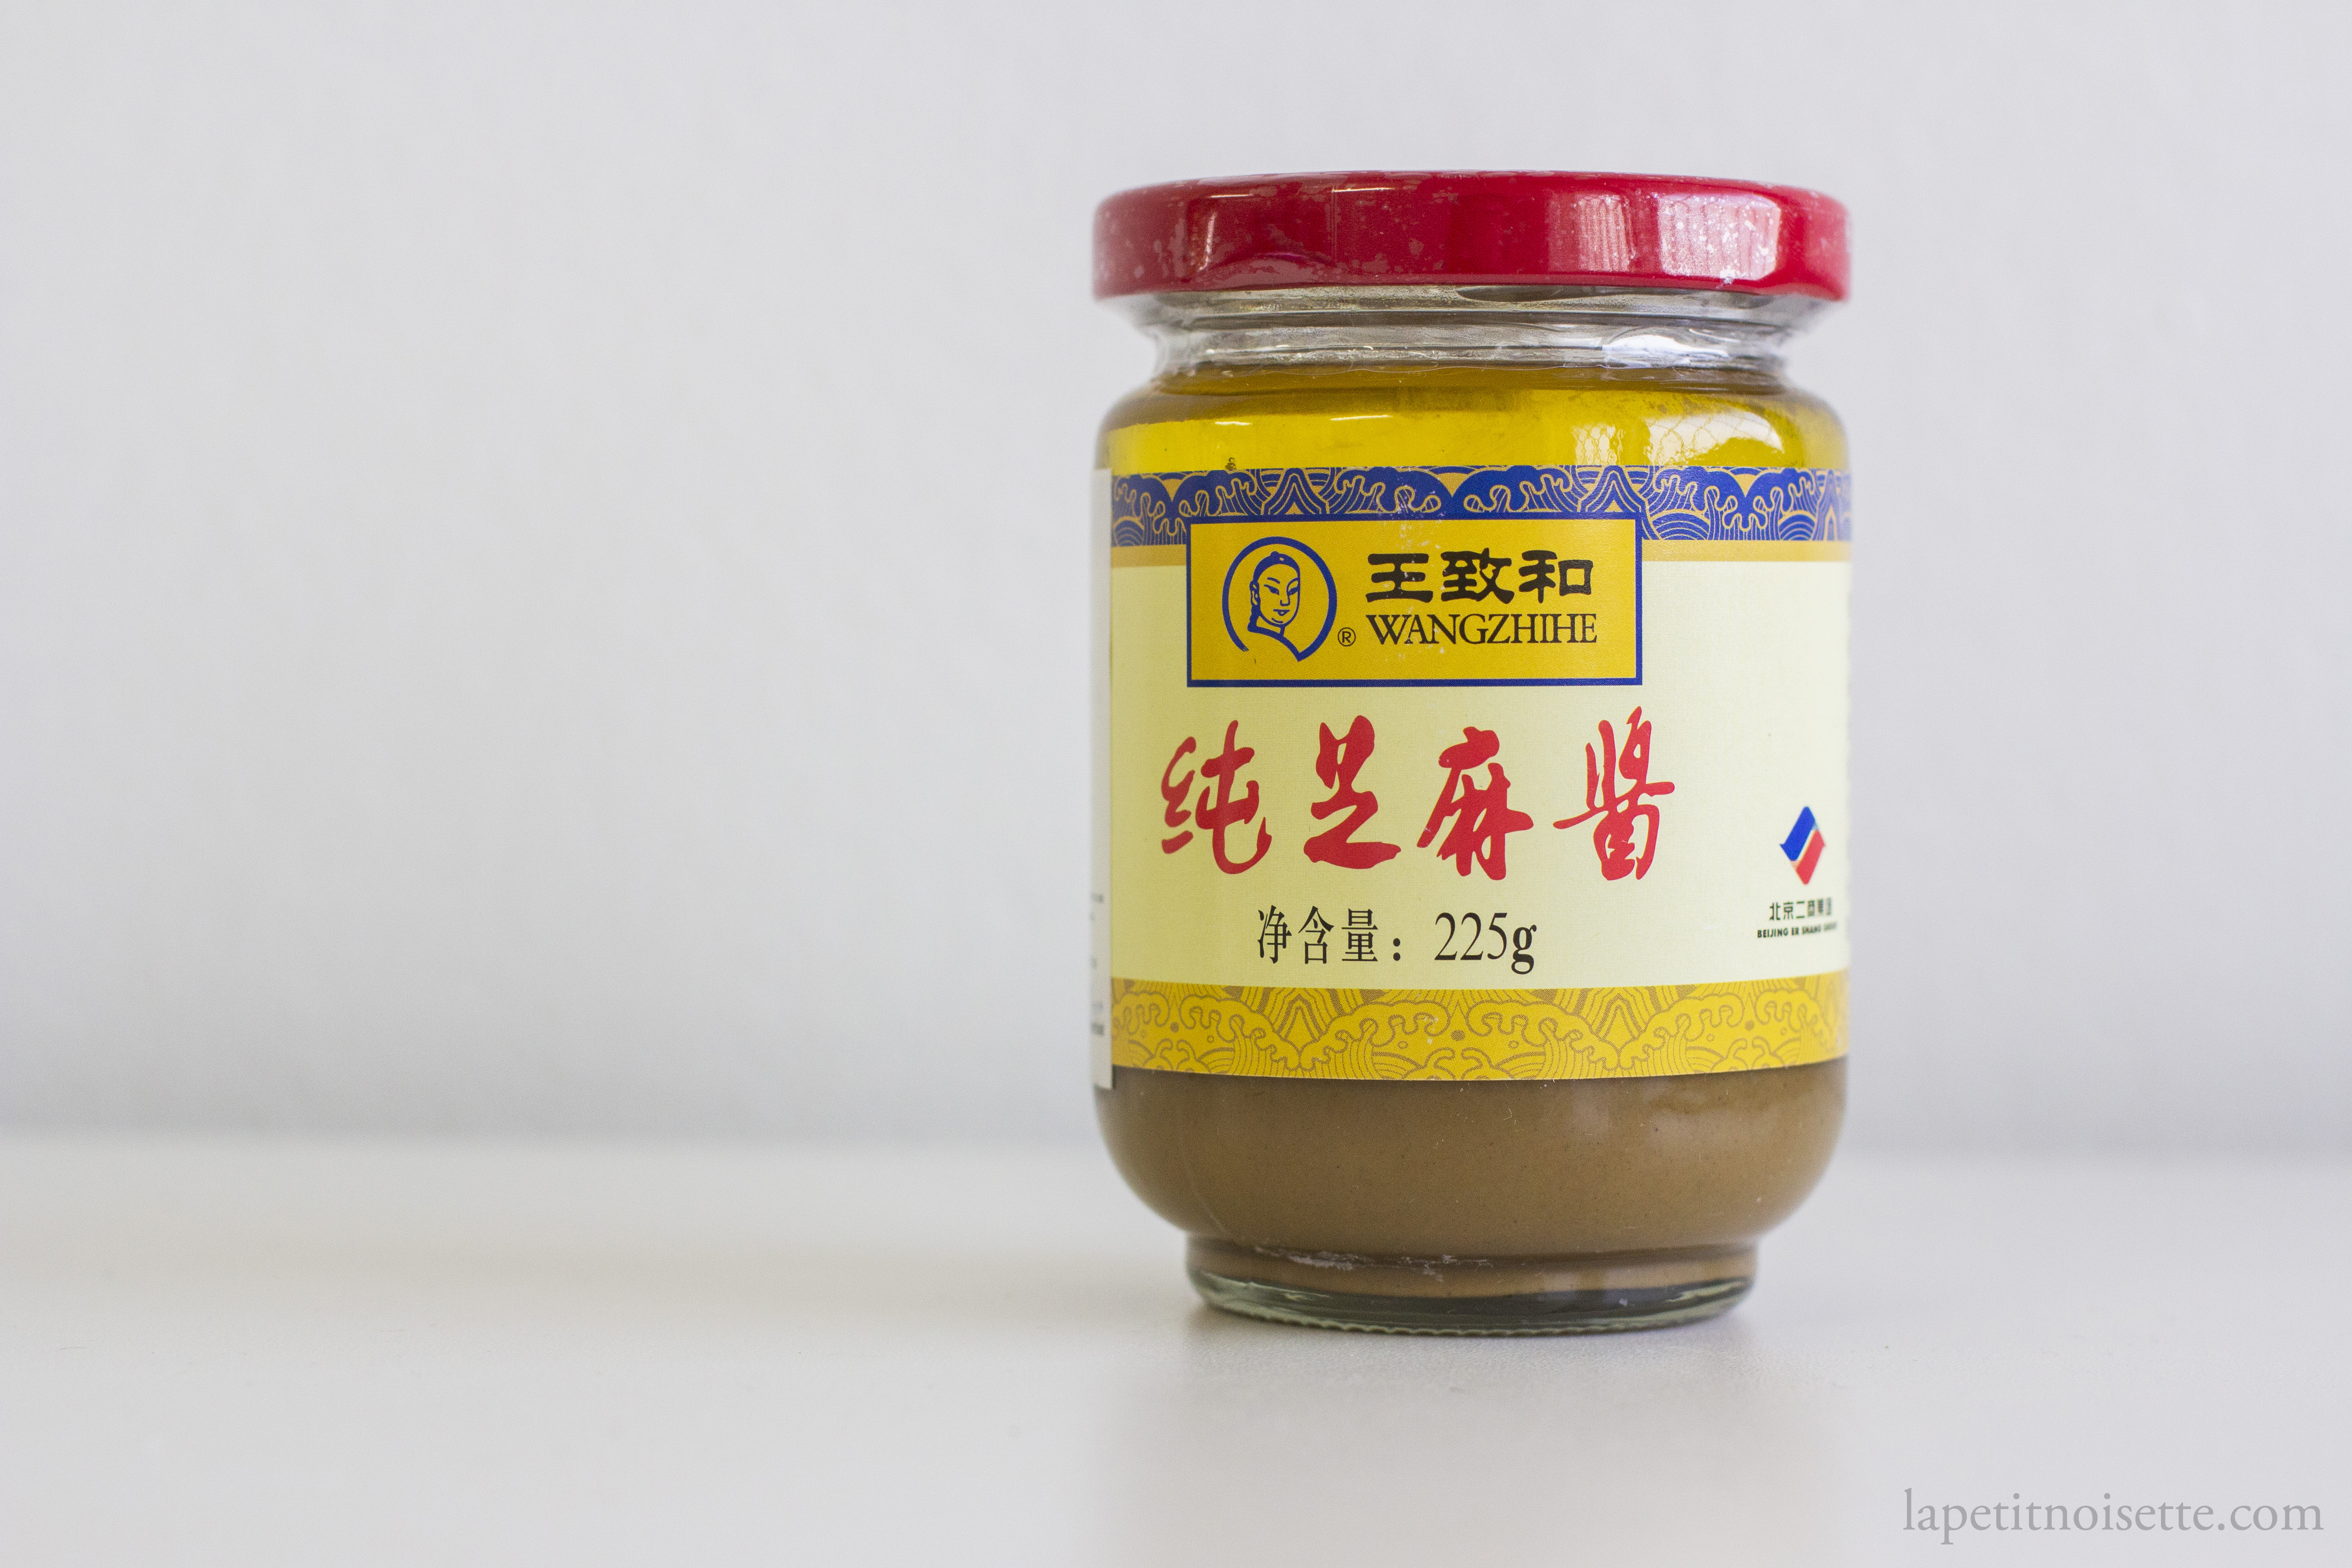 Chinese sesame seed paste.